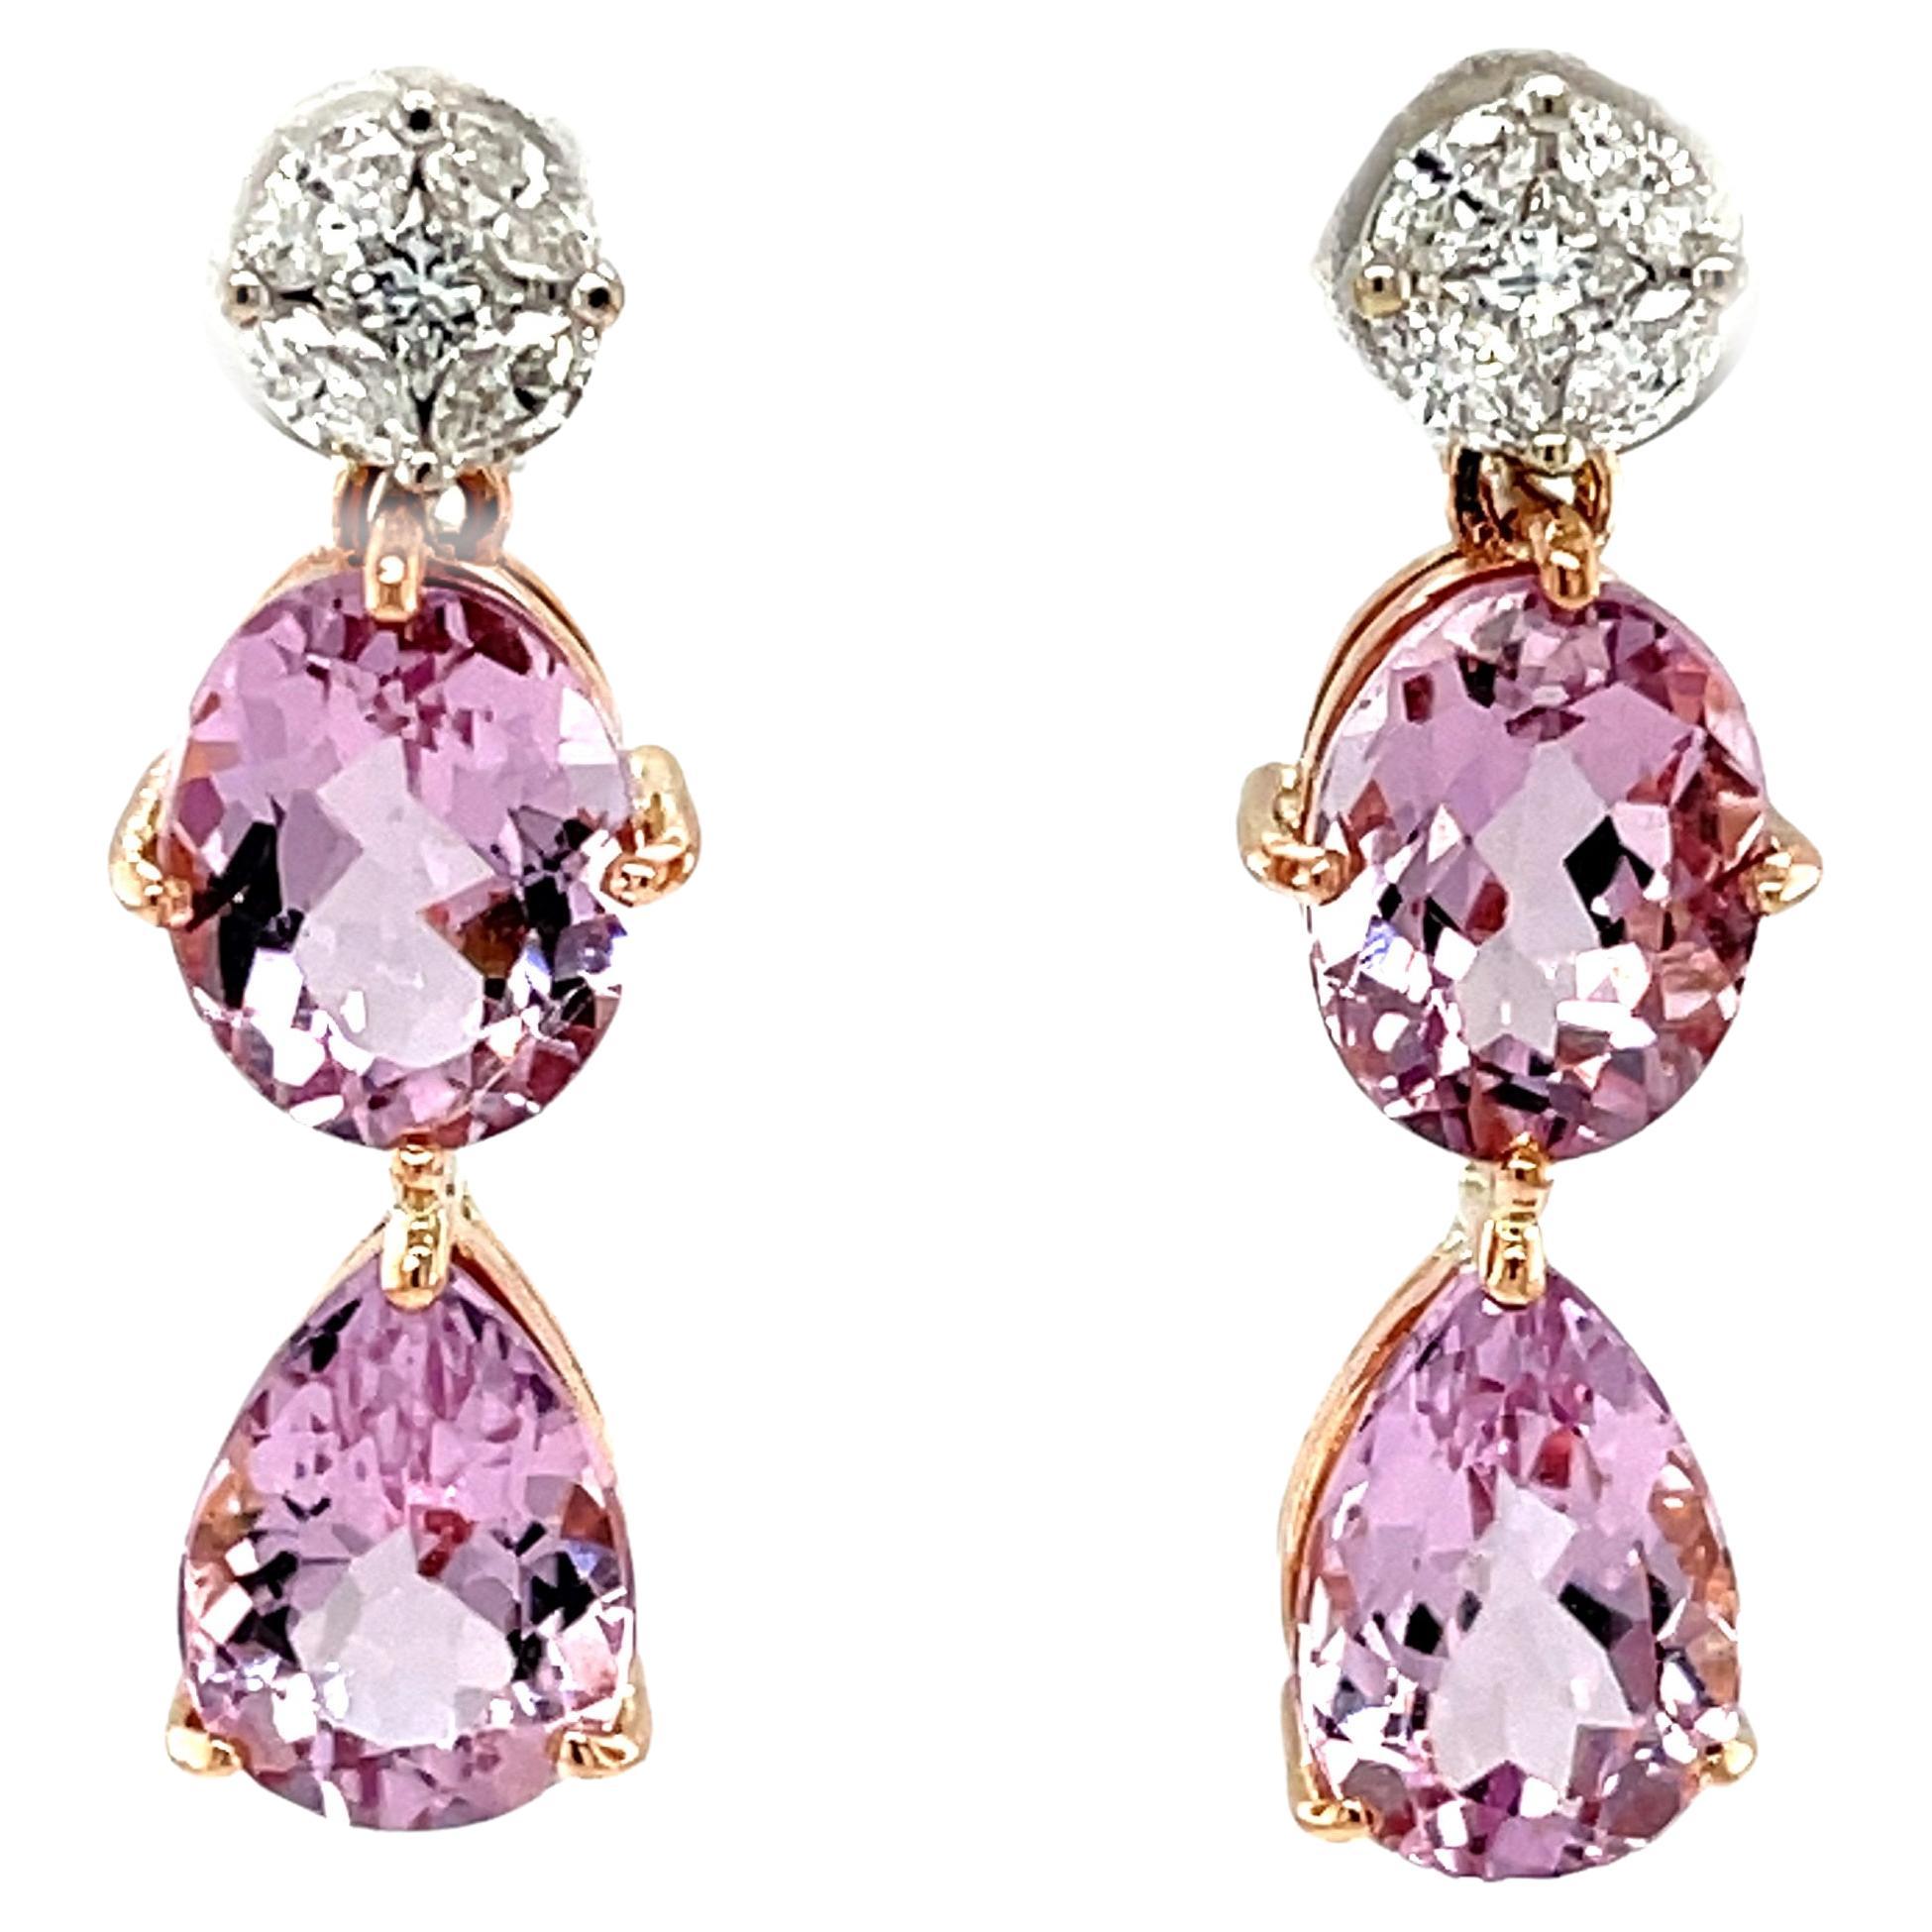 These gorgeous two-toned drop earrings feature over 7 carats of sparkling pink morganite in two shapes, dangling from brilliant white diamond tops set in 18k gold! The perfectly matched, crystalline gem morganites have beautiful, bright pink color